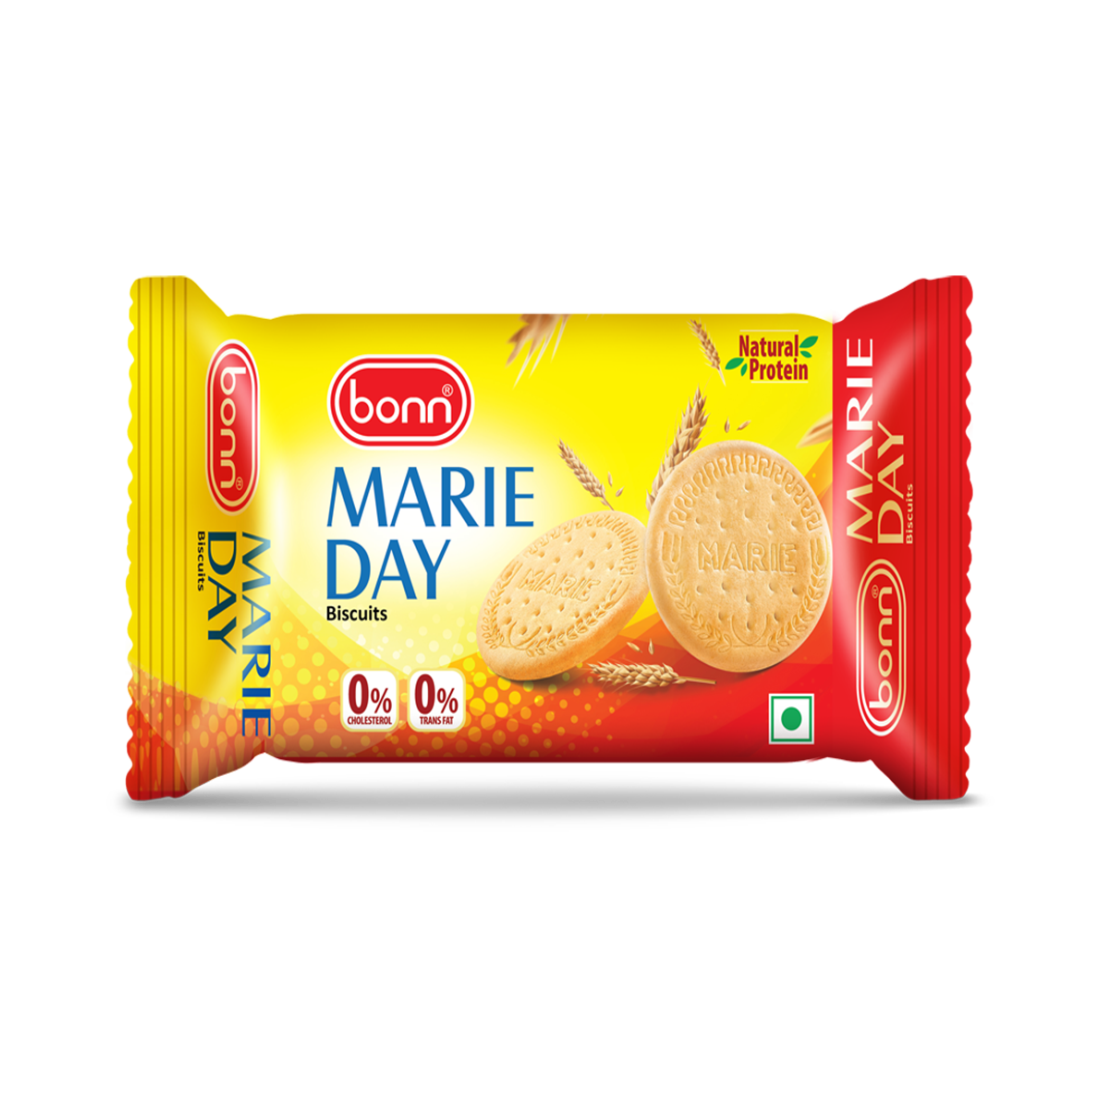 Bonn Marie Day Biscuits, Cholestrol Free, TransFat Free, Natural Protein, 80 g Pack